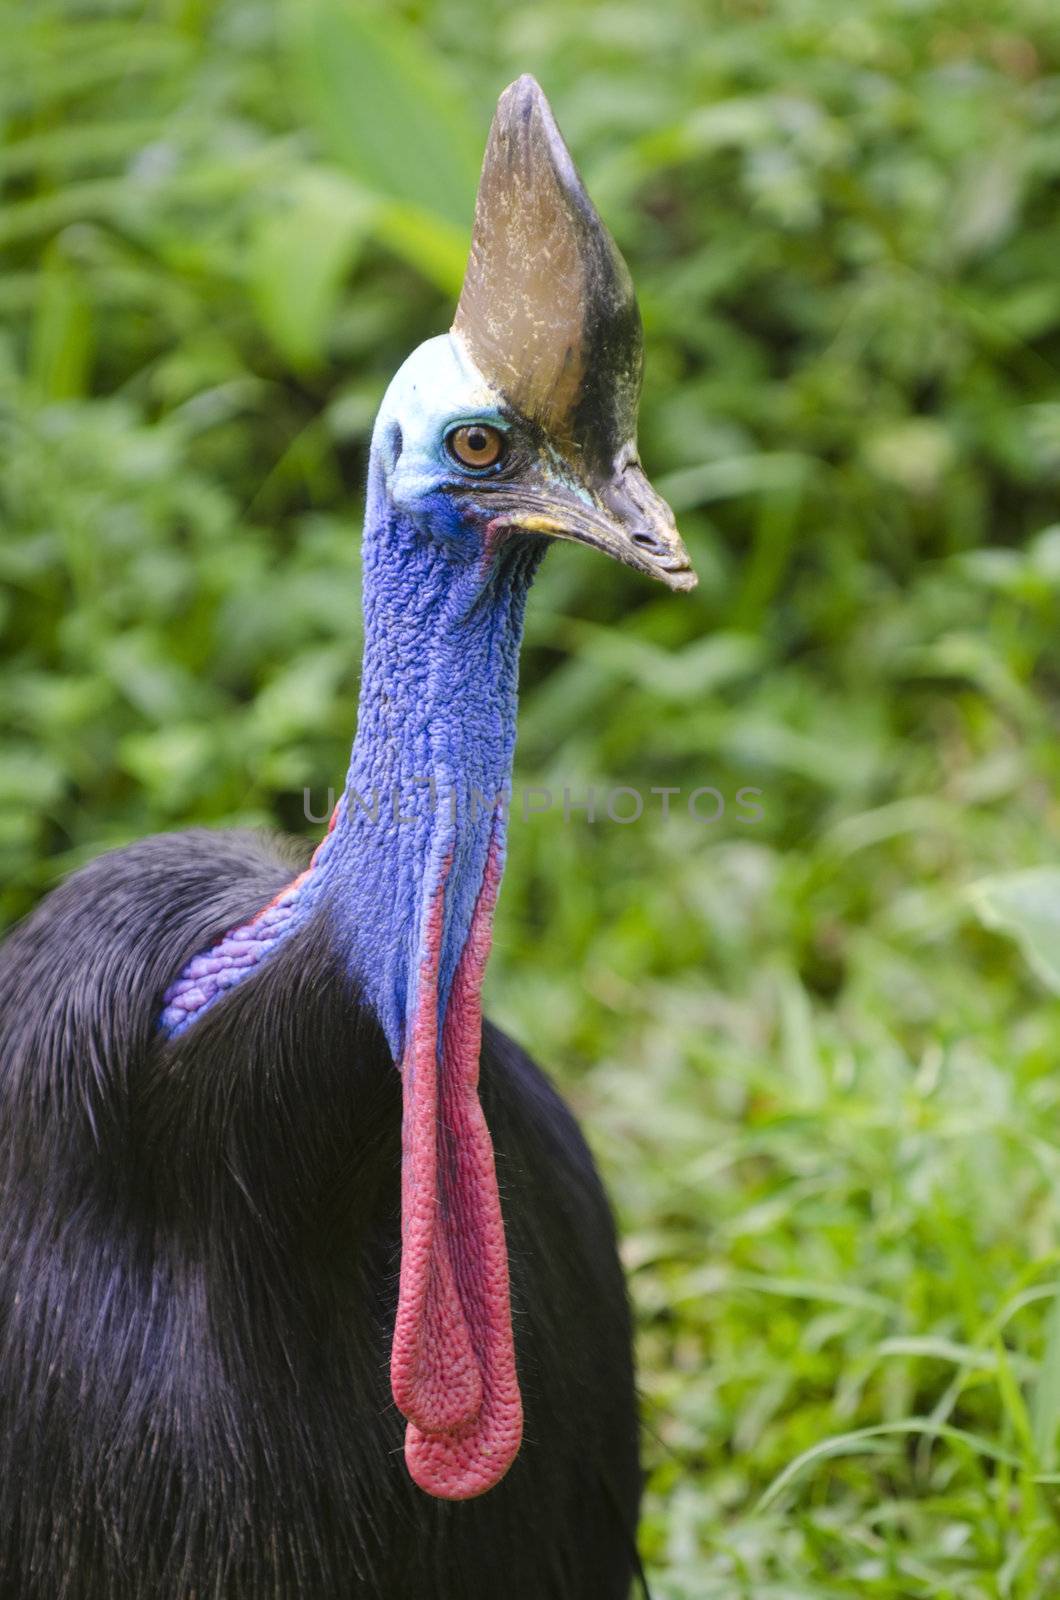 cassowary by yuliang11